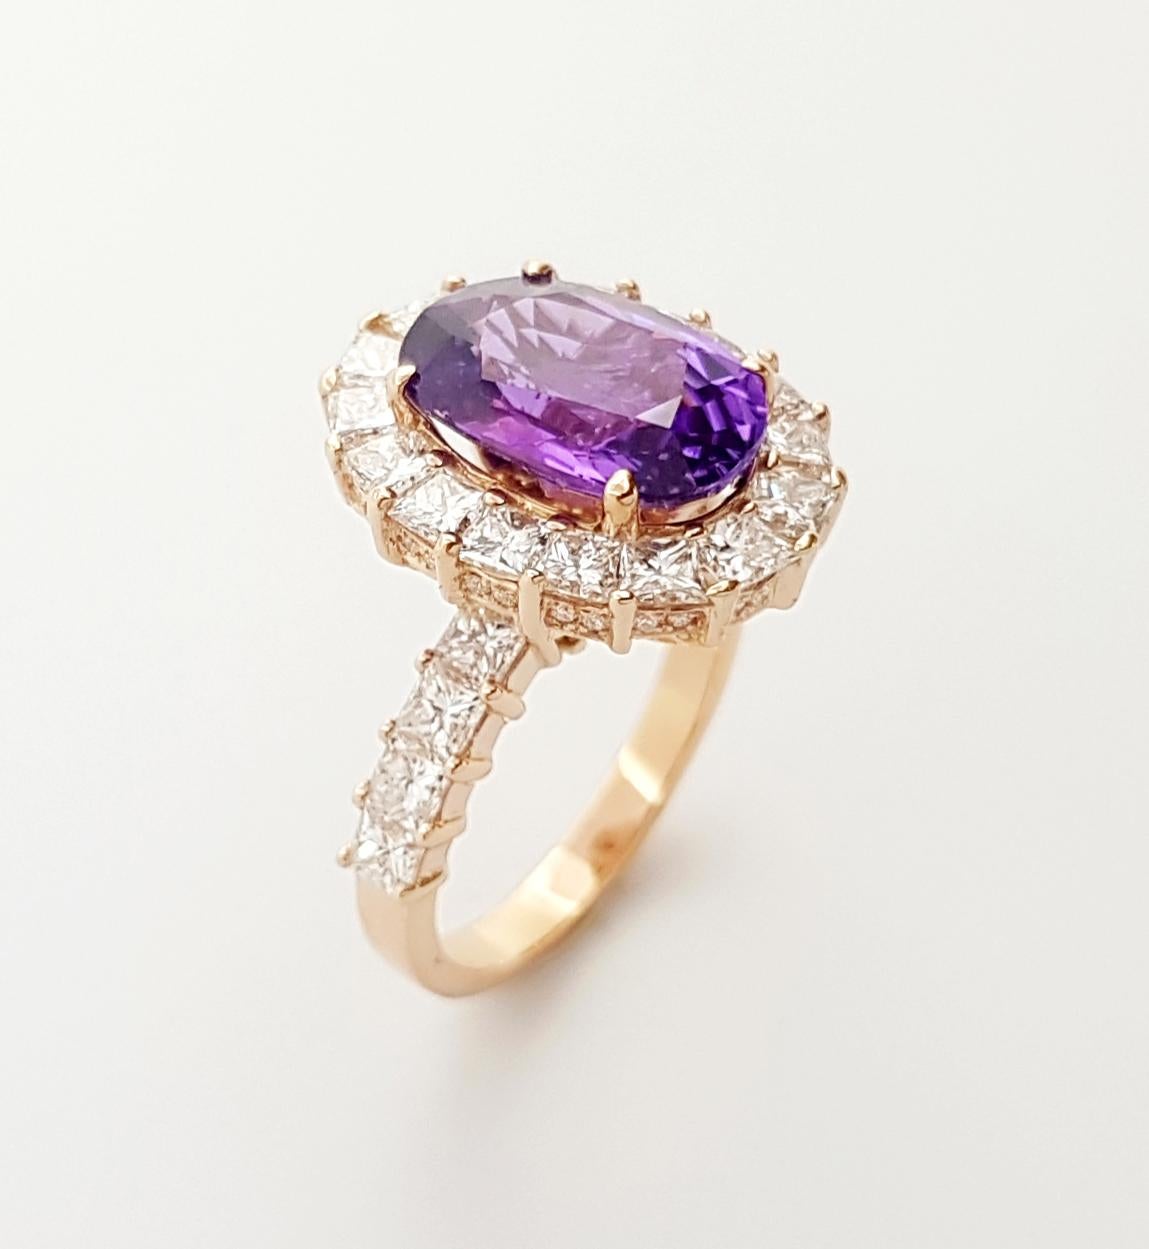 GIA Certified 5cts Purple Sapphire with Diamond Ring Set in 18k Rose Gold For Sale 3